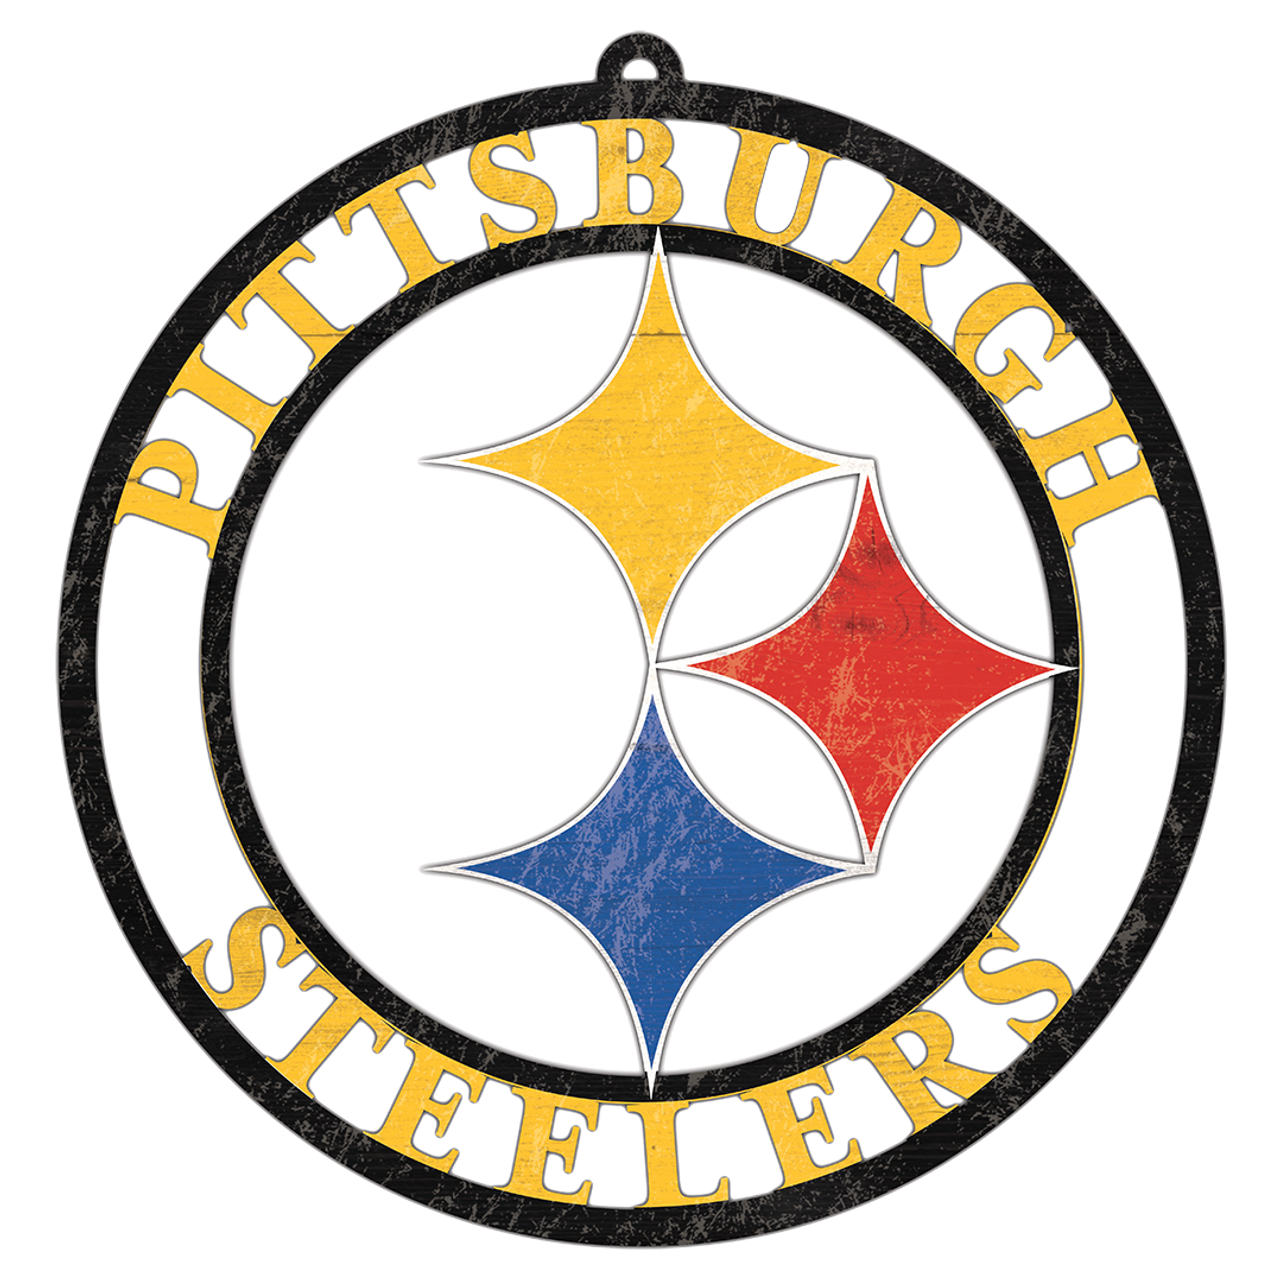 Pittsburgh Steelers Logo Clip Art drawing free image download - Clip ...